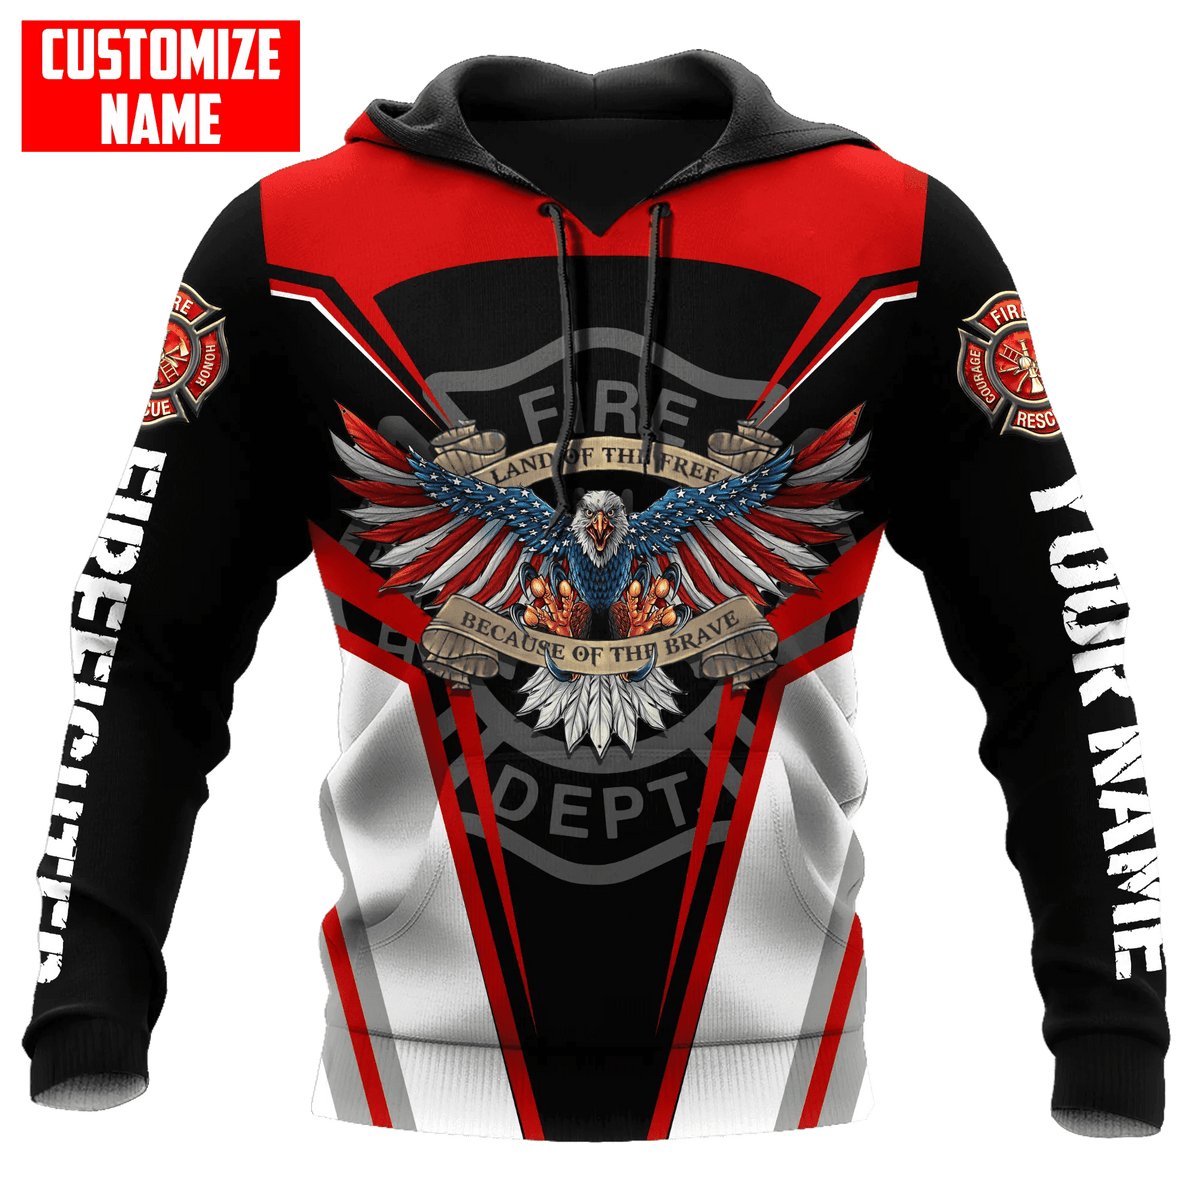 Customized With Your Name - American Bald Eagle Firefighter Sublimated Hoodie, Zip-Up or Sweatshirt - Salty Medic Clothing Co.